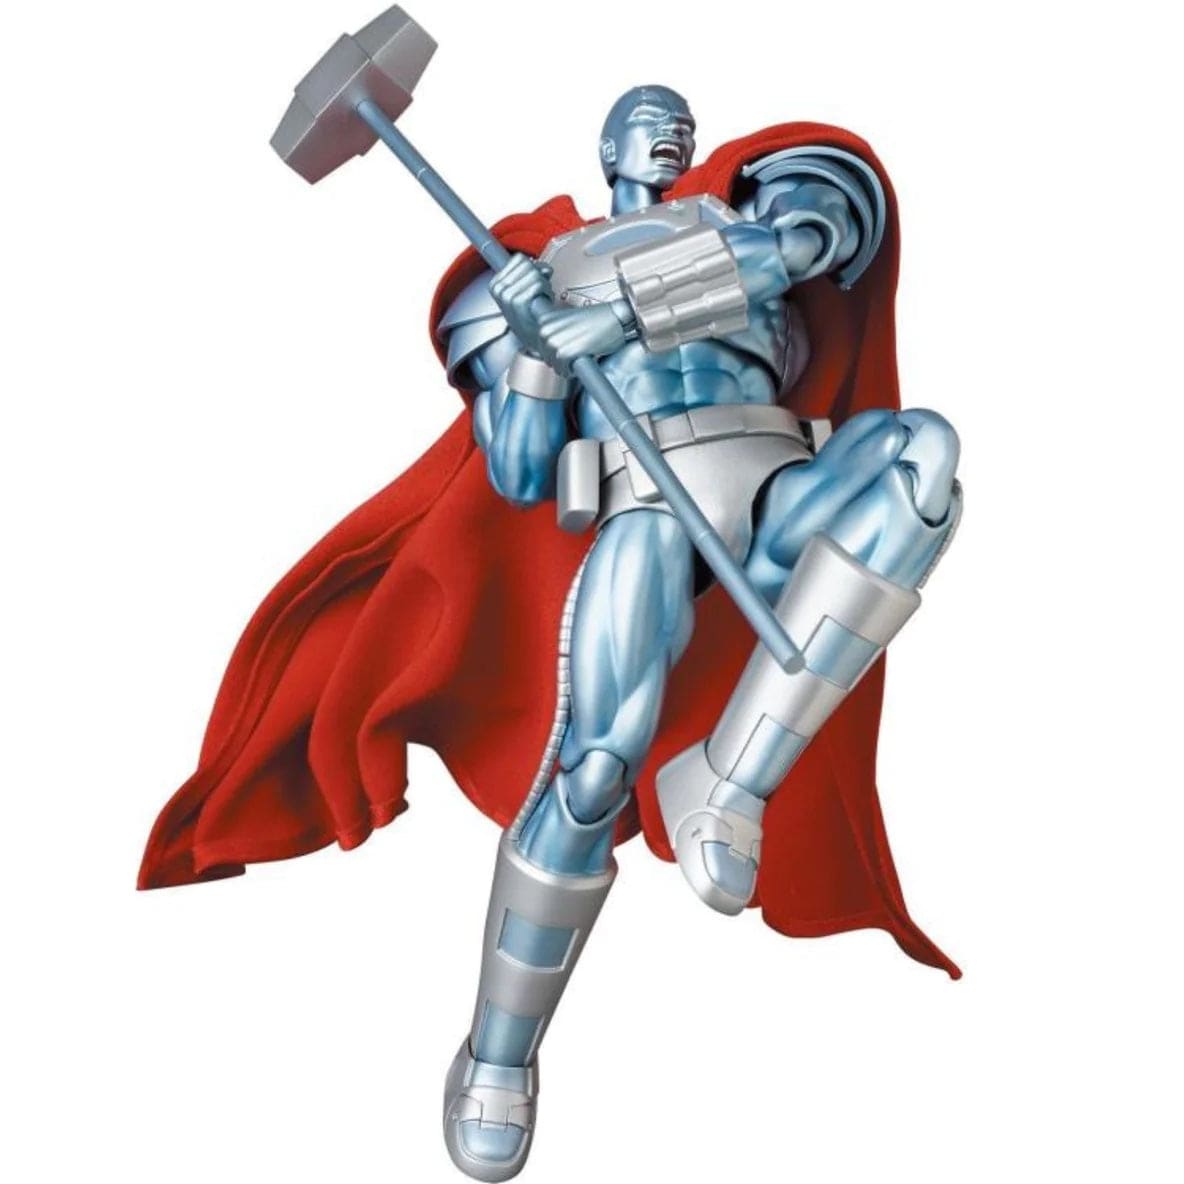 Medicom Toy MAFEX No. 181 The Return of Superman Steel Action Figure